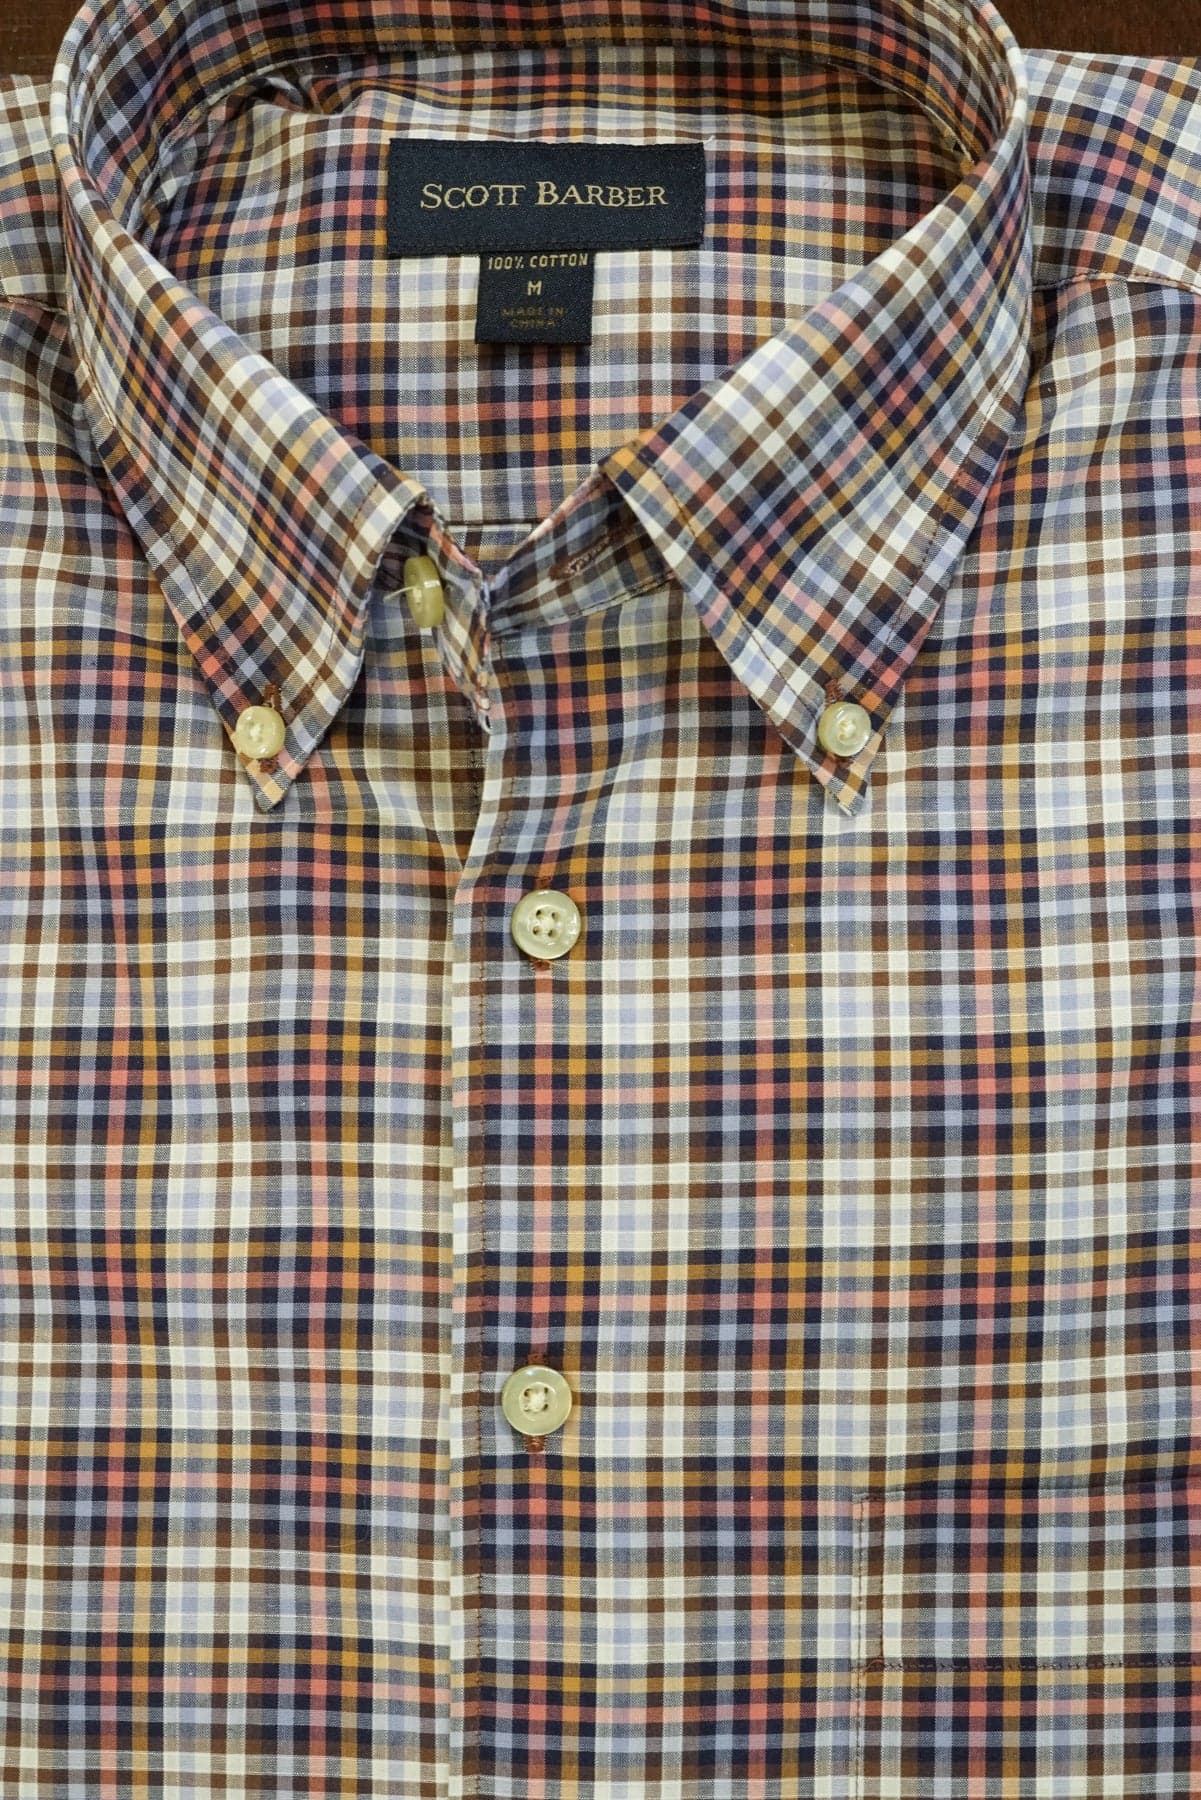 Dusty Blue, Navy and Khaki Plaid Button Down Shirt by Scott Barber - Rainwater's Men's Clothing and Tuxedo Rental